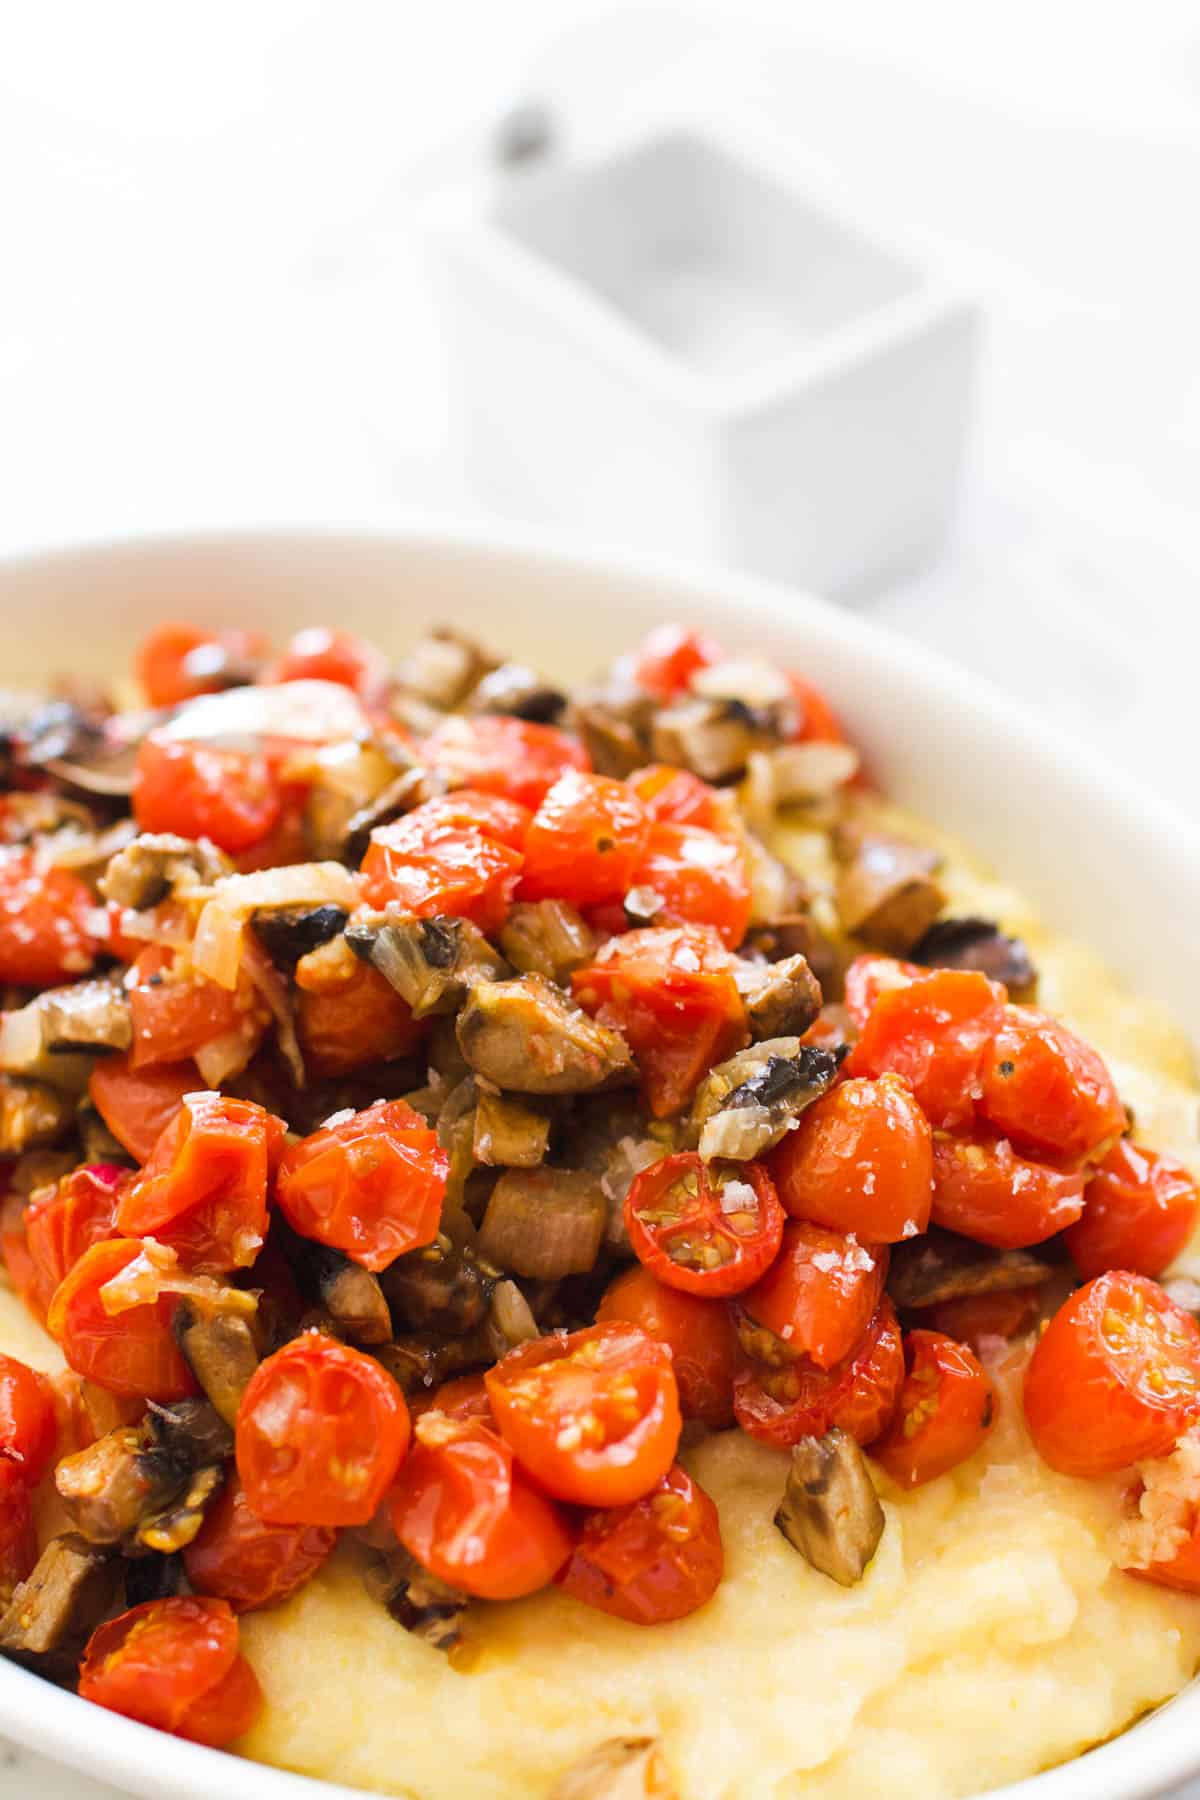 Close up of tomatoes and mushrooms on top of polenta sprinkled with sea salt.